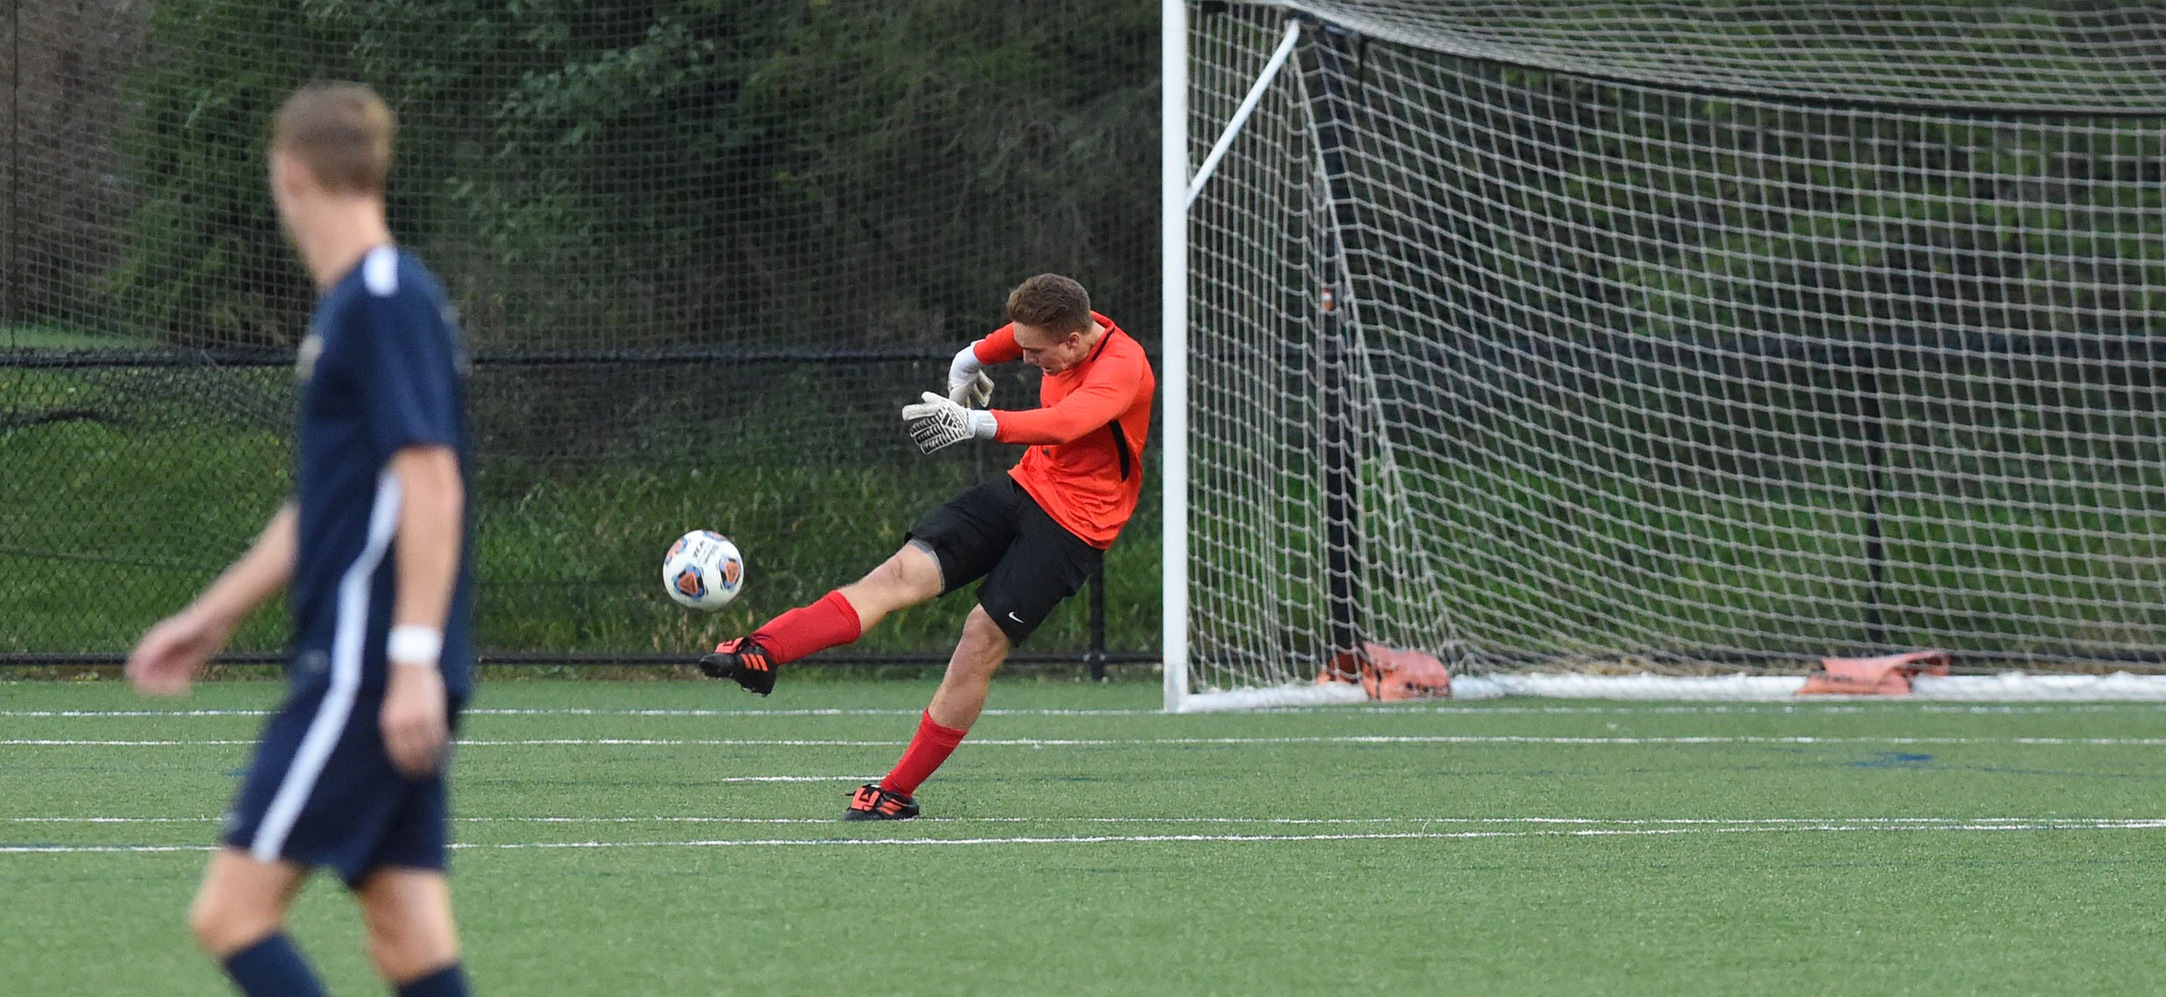 Andrew Yeich totaled six saves in the Eagles, 3-0 loss against King's.